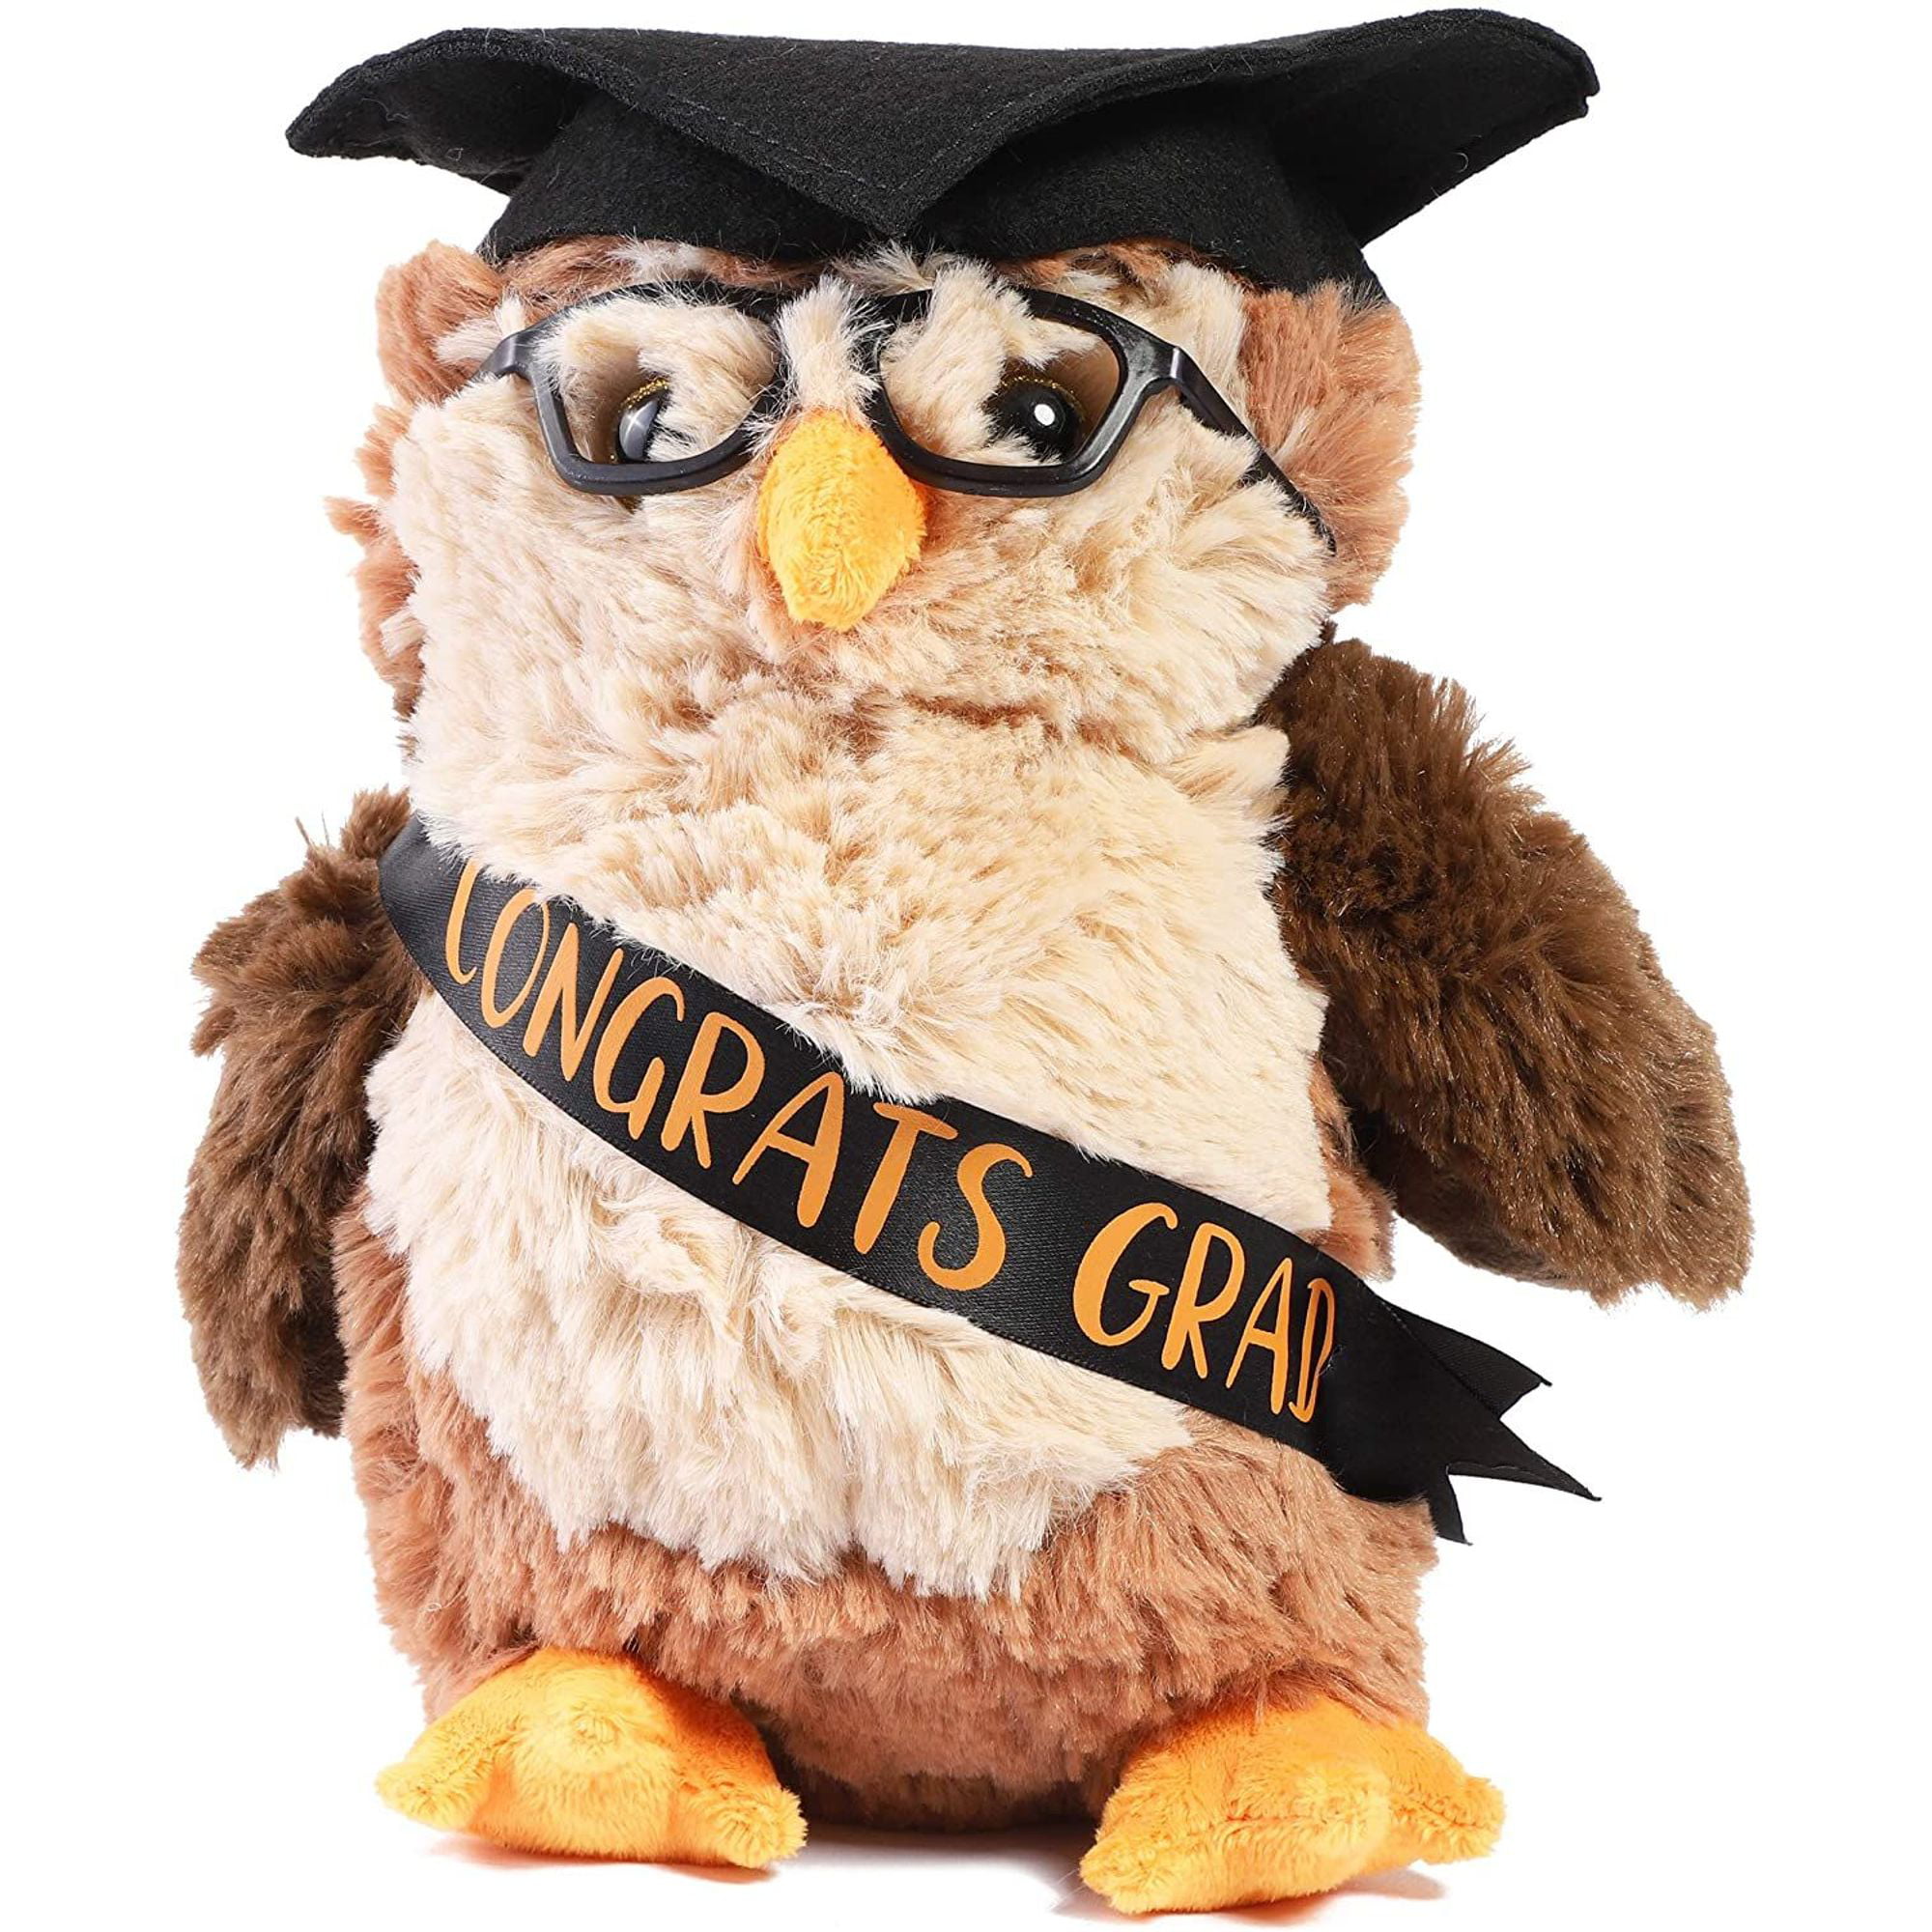 9.2" Graduation Owl Plush Stuffed Animal with Glasses & Academic Cap, High School College Gift for Him or Her